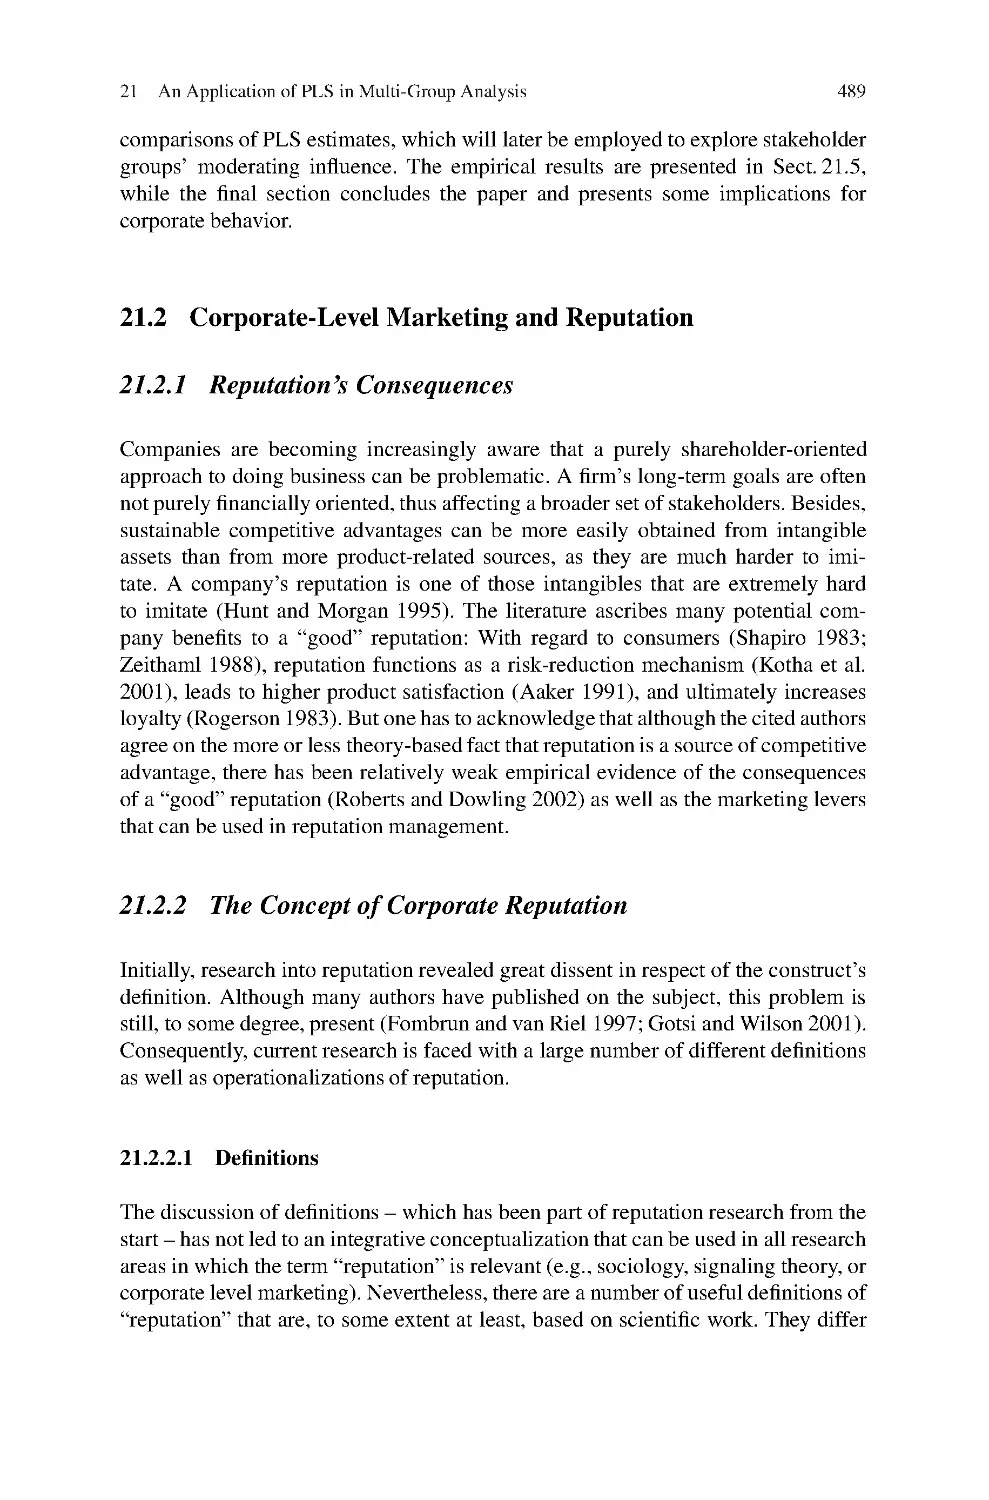 21.2 Corporate-Level Marketing and Reputation
21.2.2 The Concept of Corporate Reputation